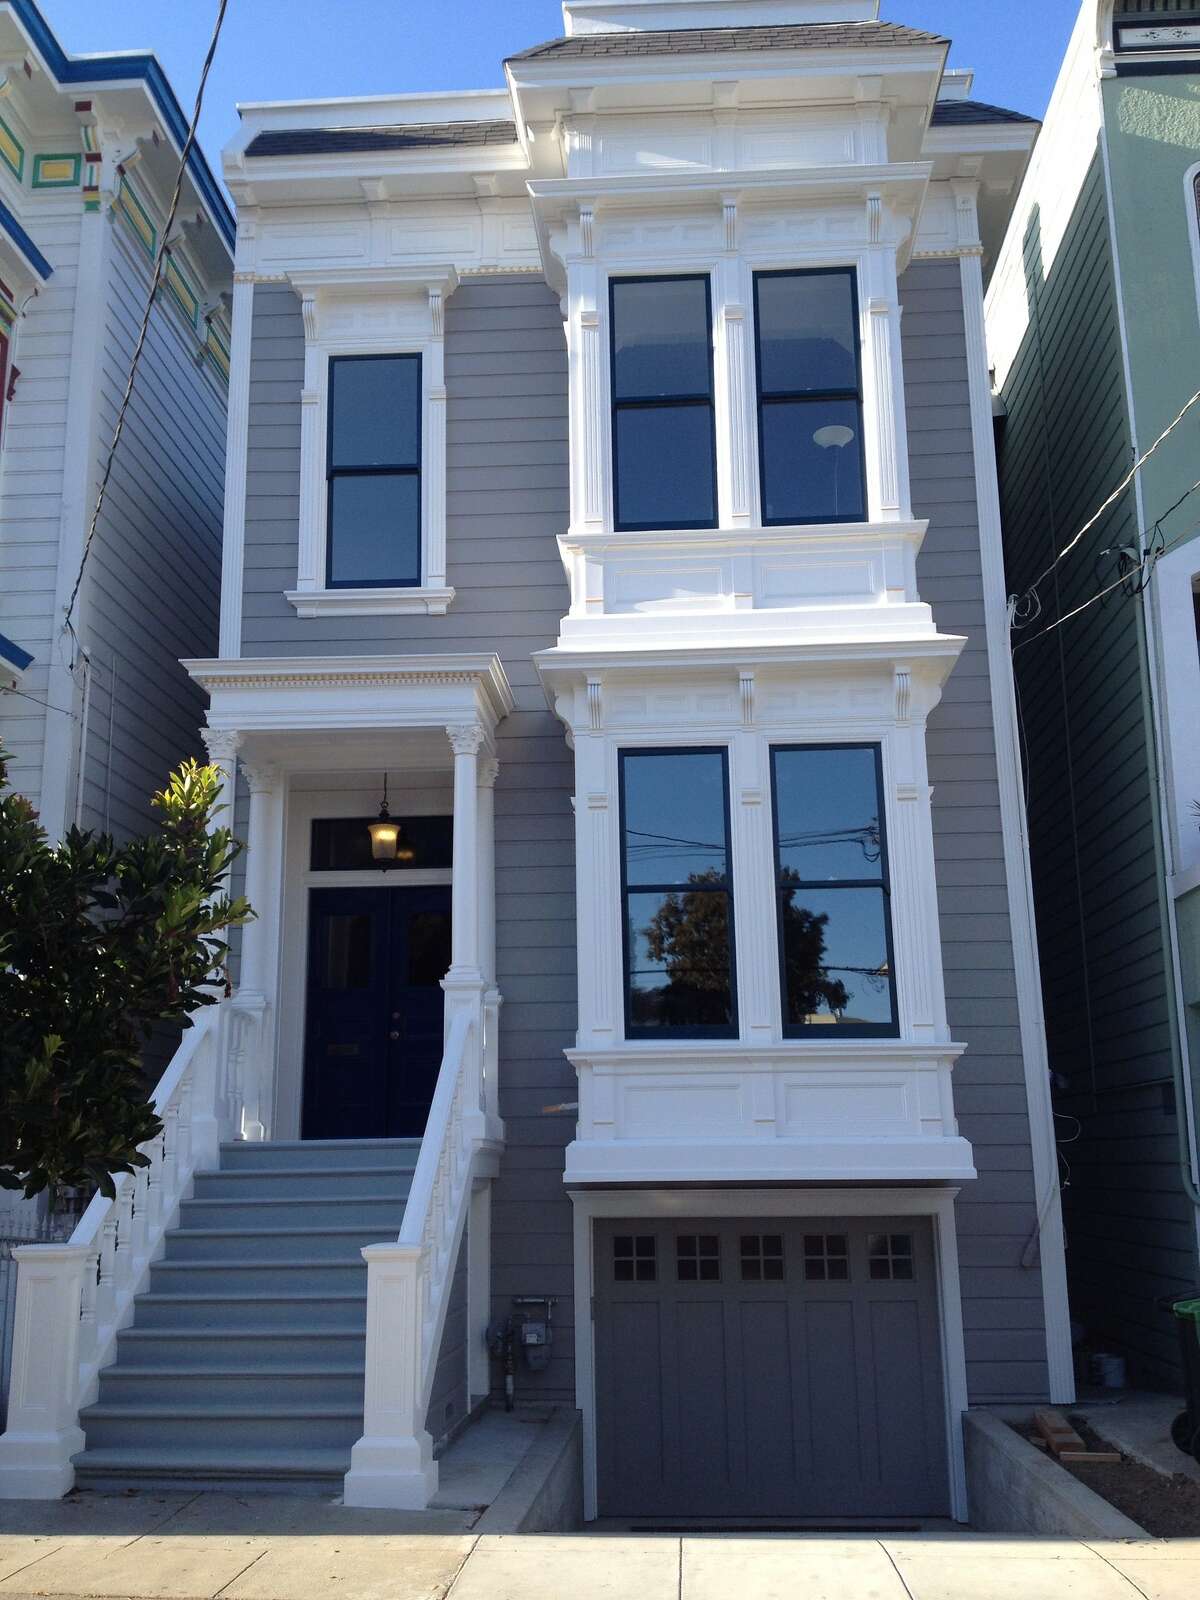 The home with its new facade and double-paned windows, one of many extensive renovations over the years. MORE: The hidden costs of living in San Francisco that can break the bank >>>